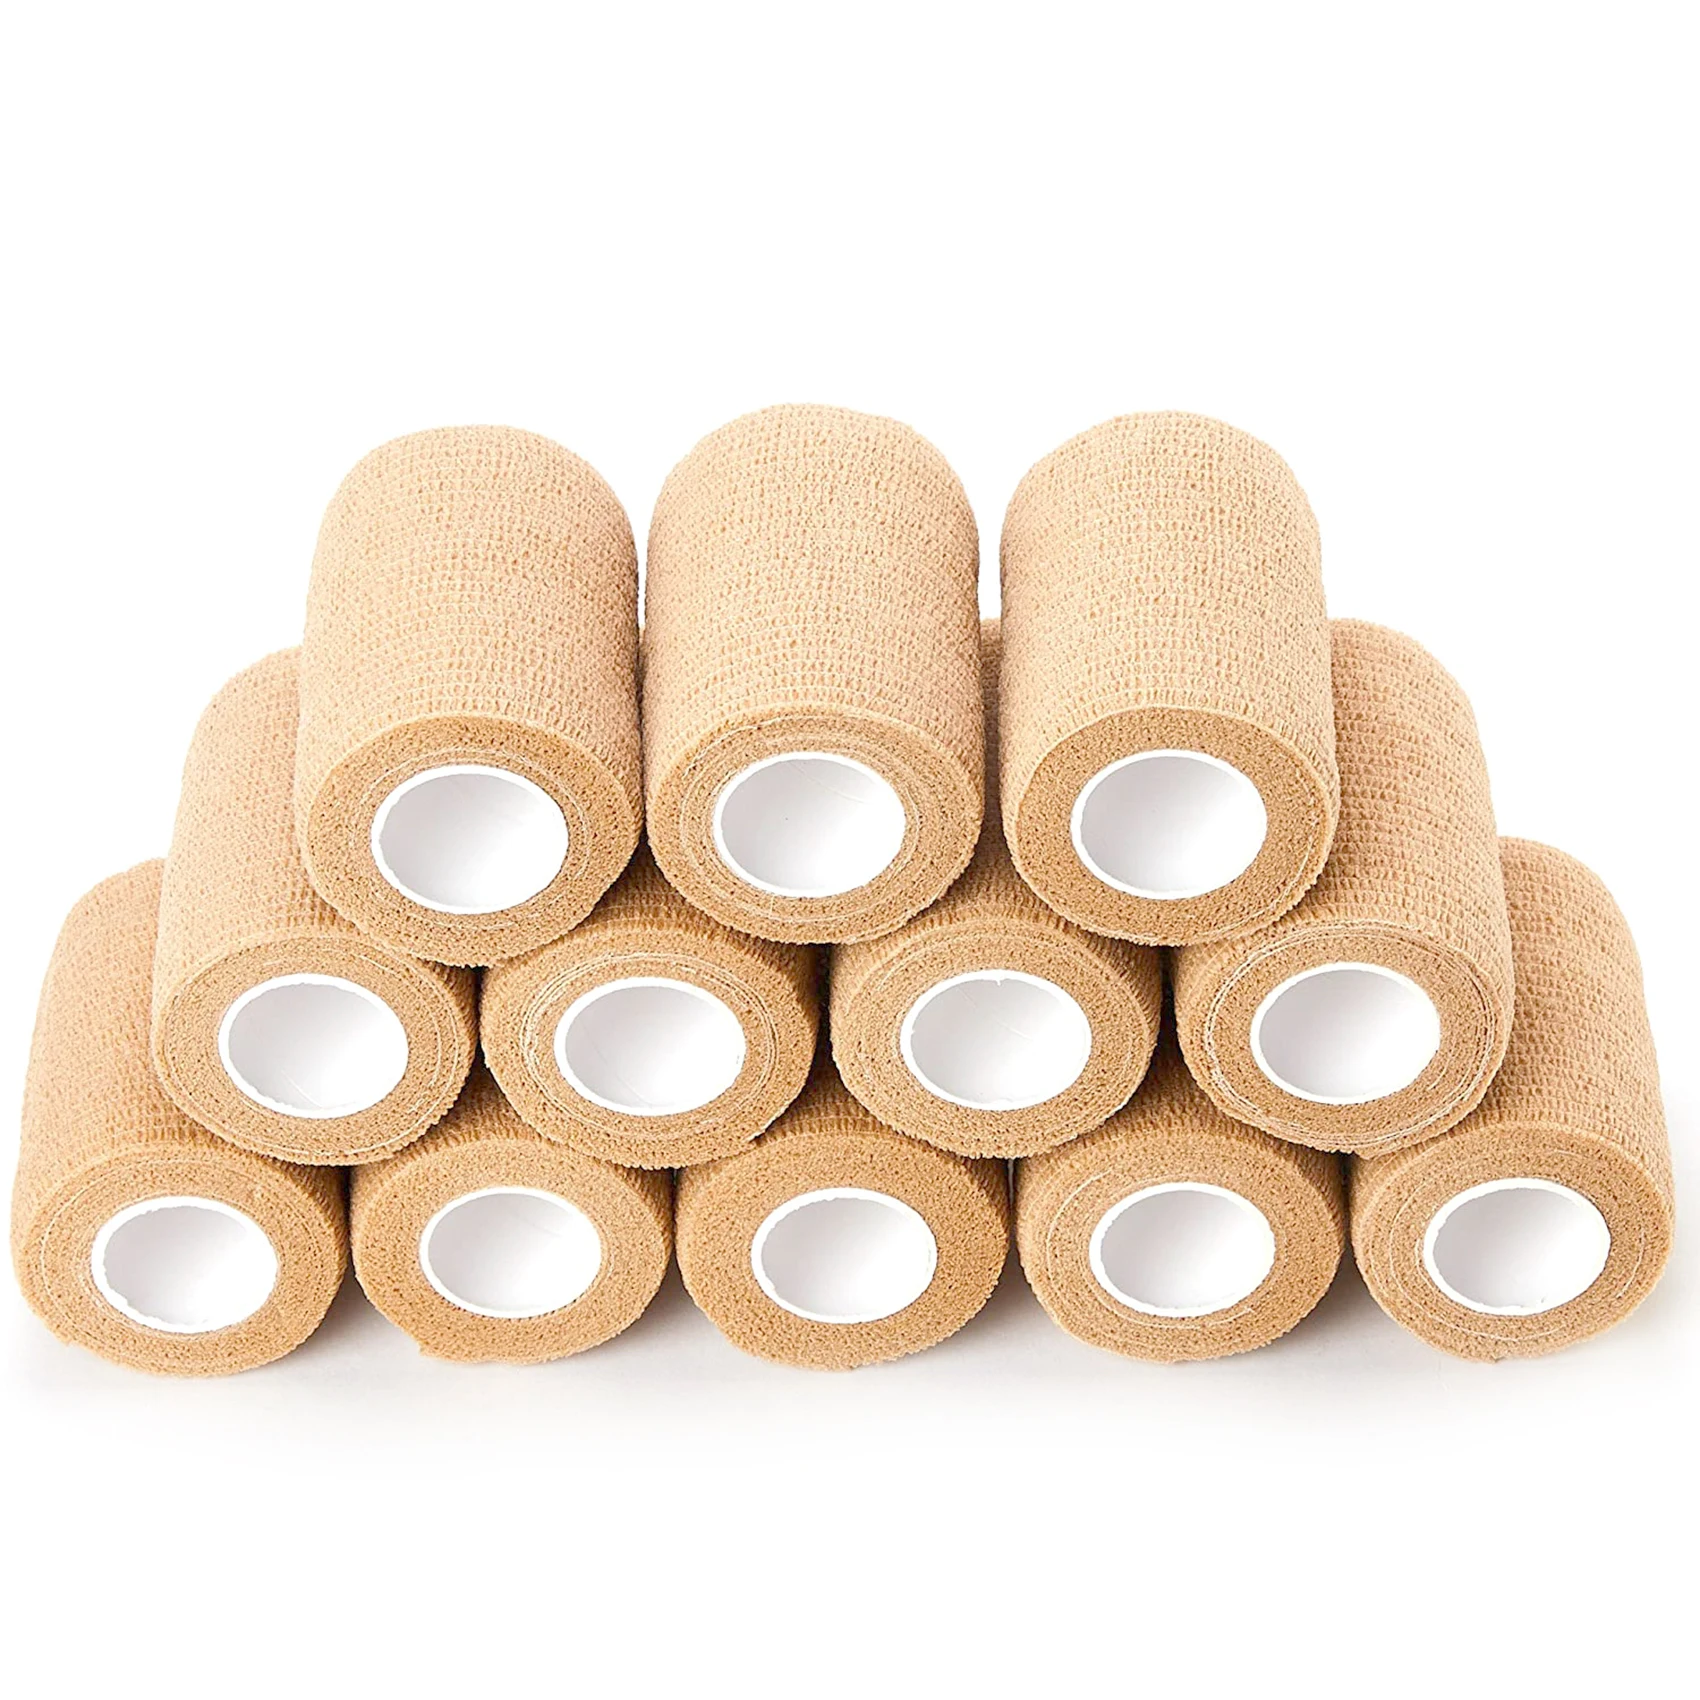 

3 inch x 5 Yards 16 Rolls Self Adherent Wrap Cohesive Bandage for Stretch Athletic, Ankle Sprains & Swelling Sports Animals